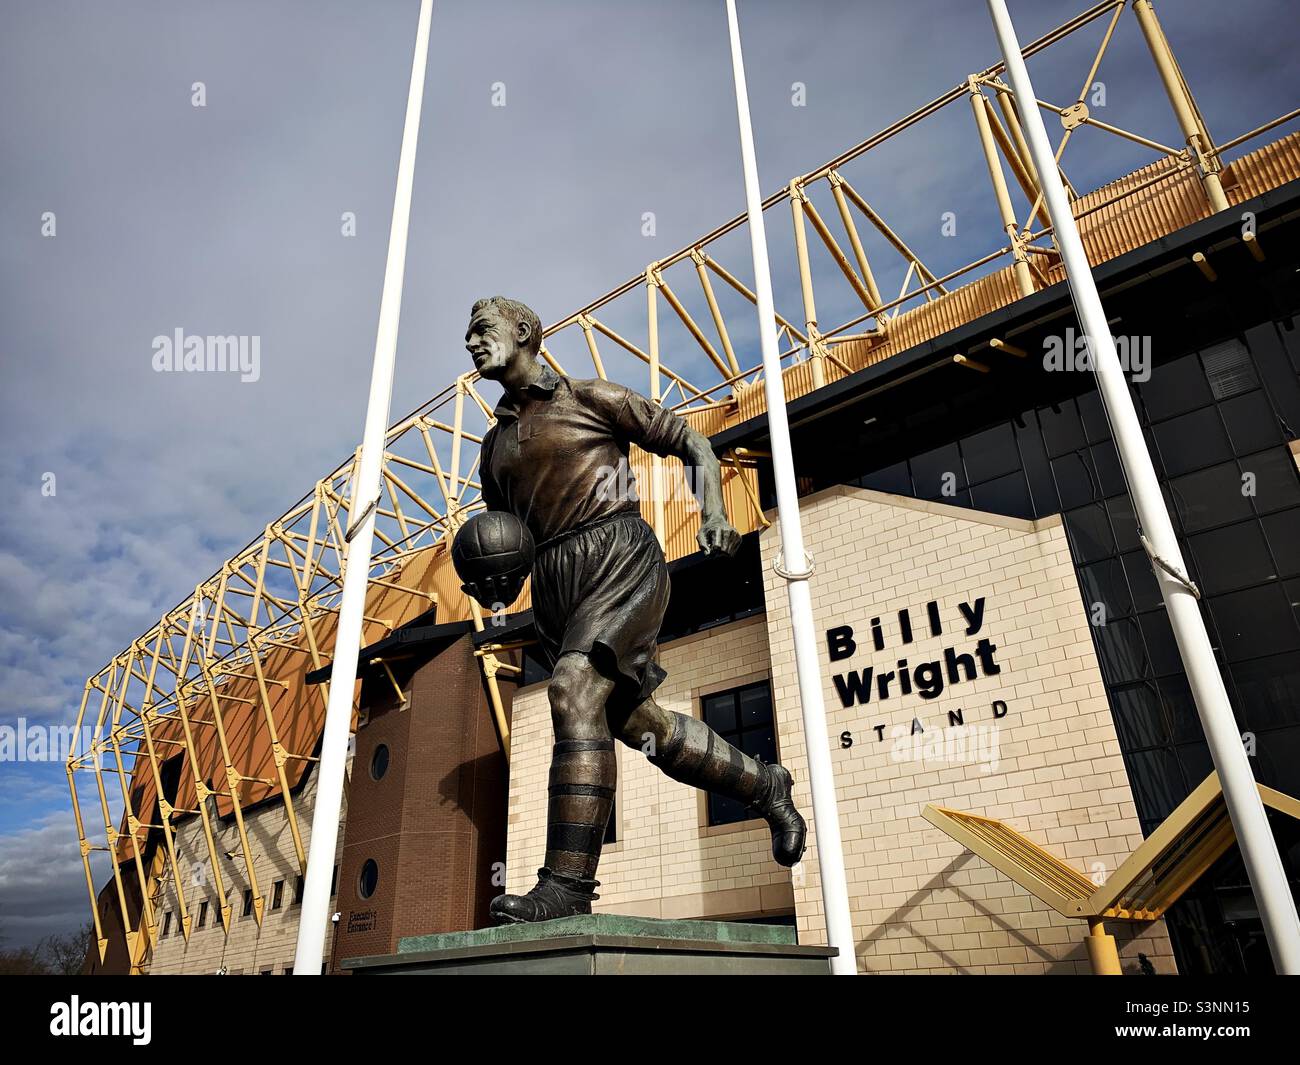 A statue of footballer Billy Wright is seen outside Molineaux stadium, home to Wolverhampton Wanderers football team. Stock Photo